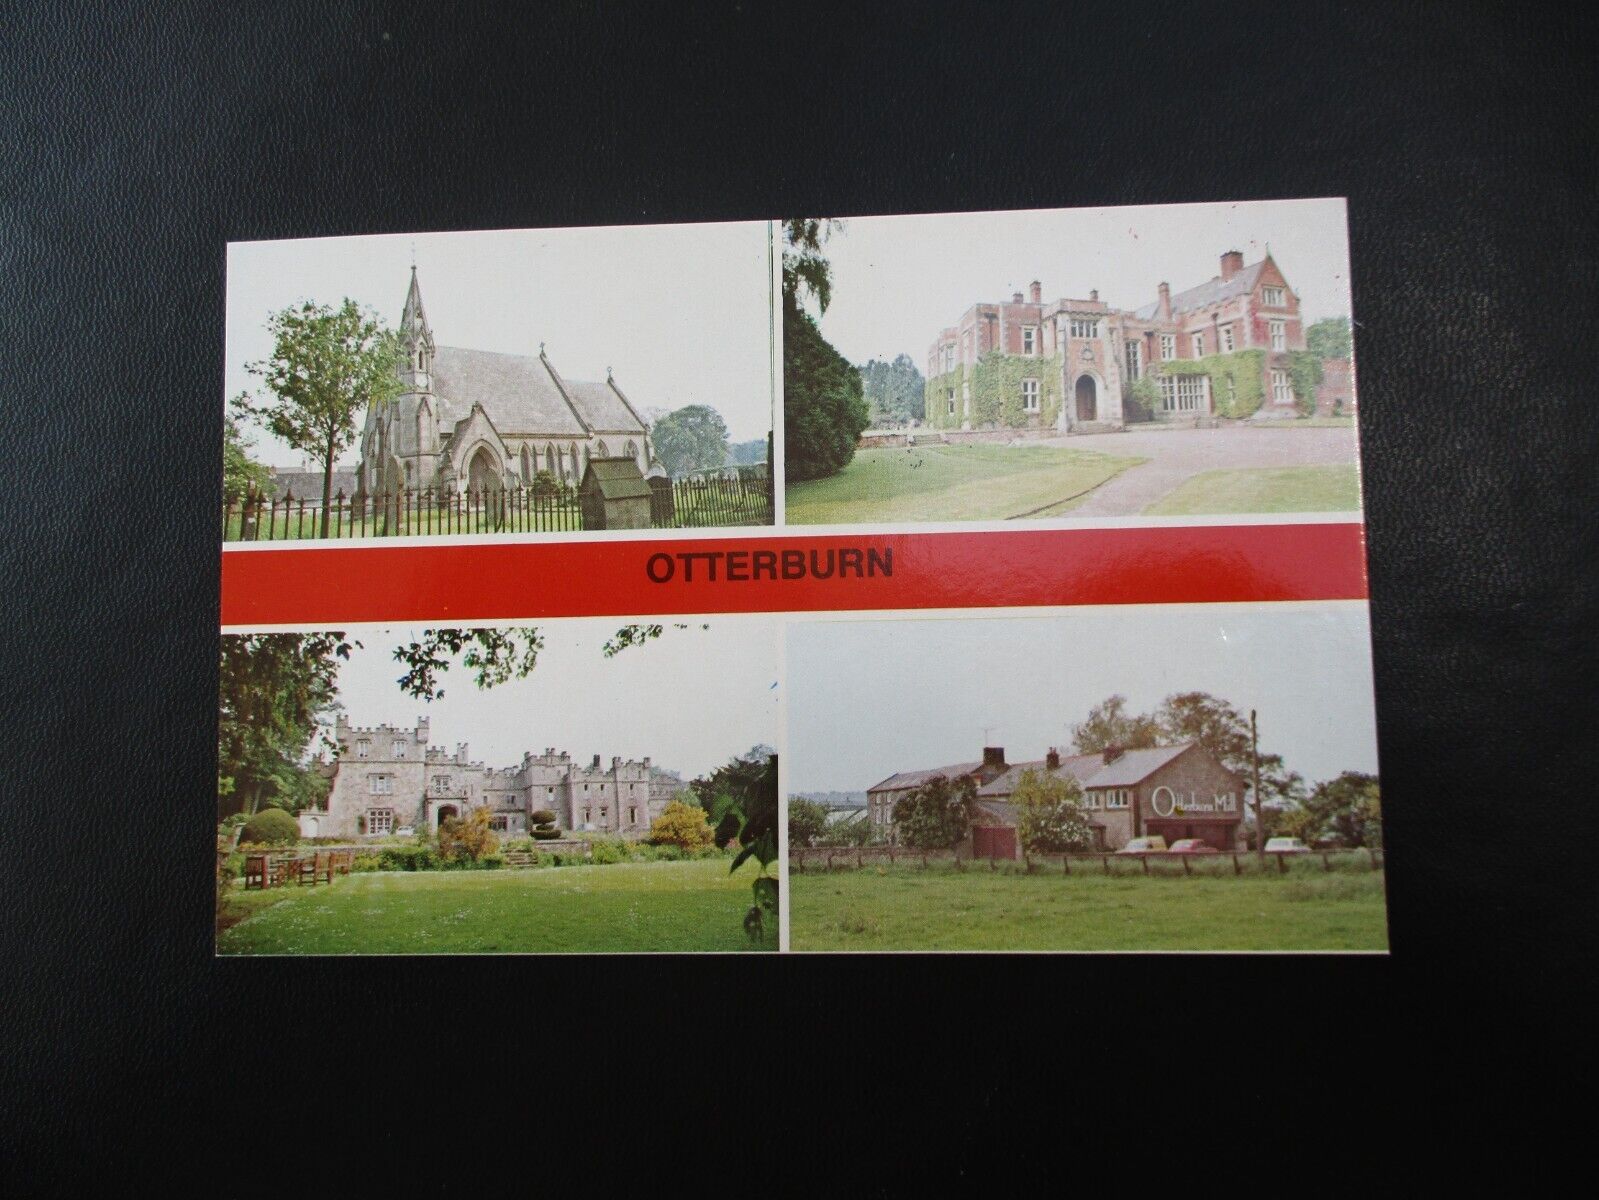 House Clearance - Otterburn, Northumberland -Multiview - St Johns Church, Tower Hotel, Hall & Mill